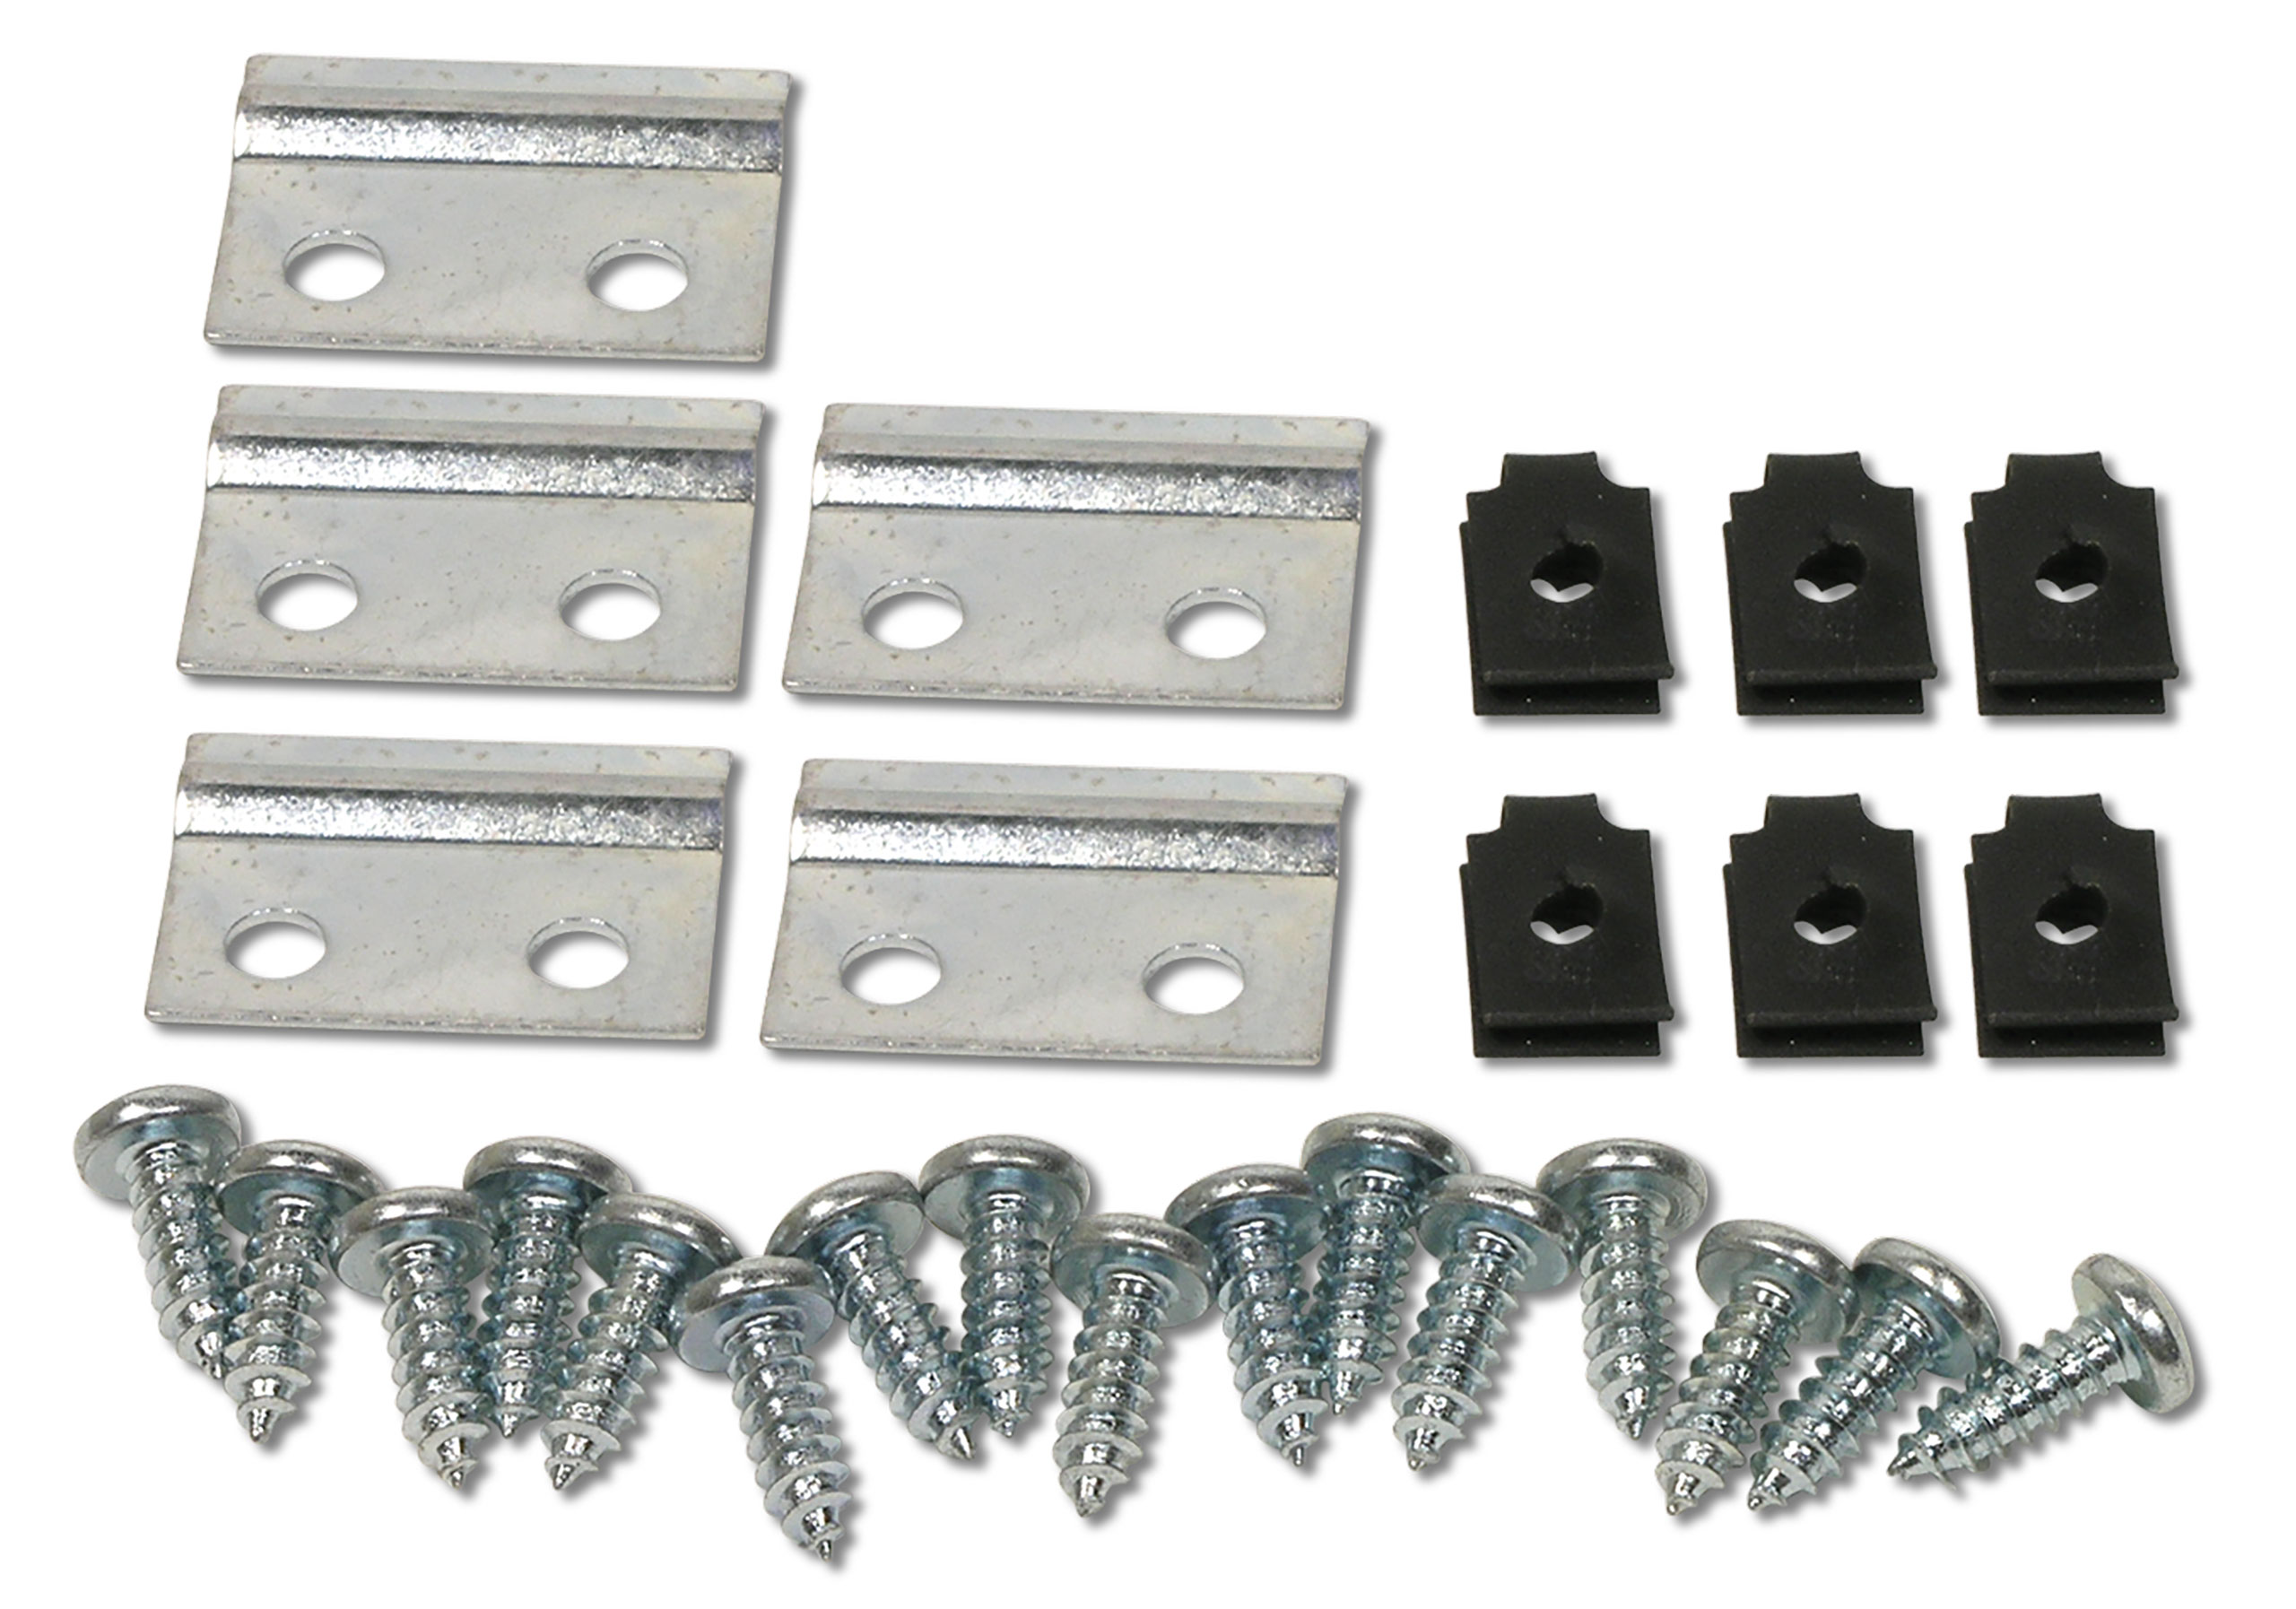 C2 1963-1964 Chevrolet Corvette Grille Molding Mounting Kit. 20 Piece - Auto Accessories of America